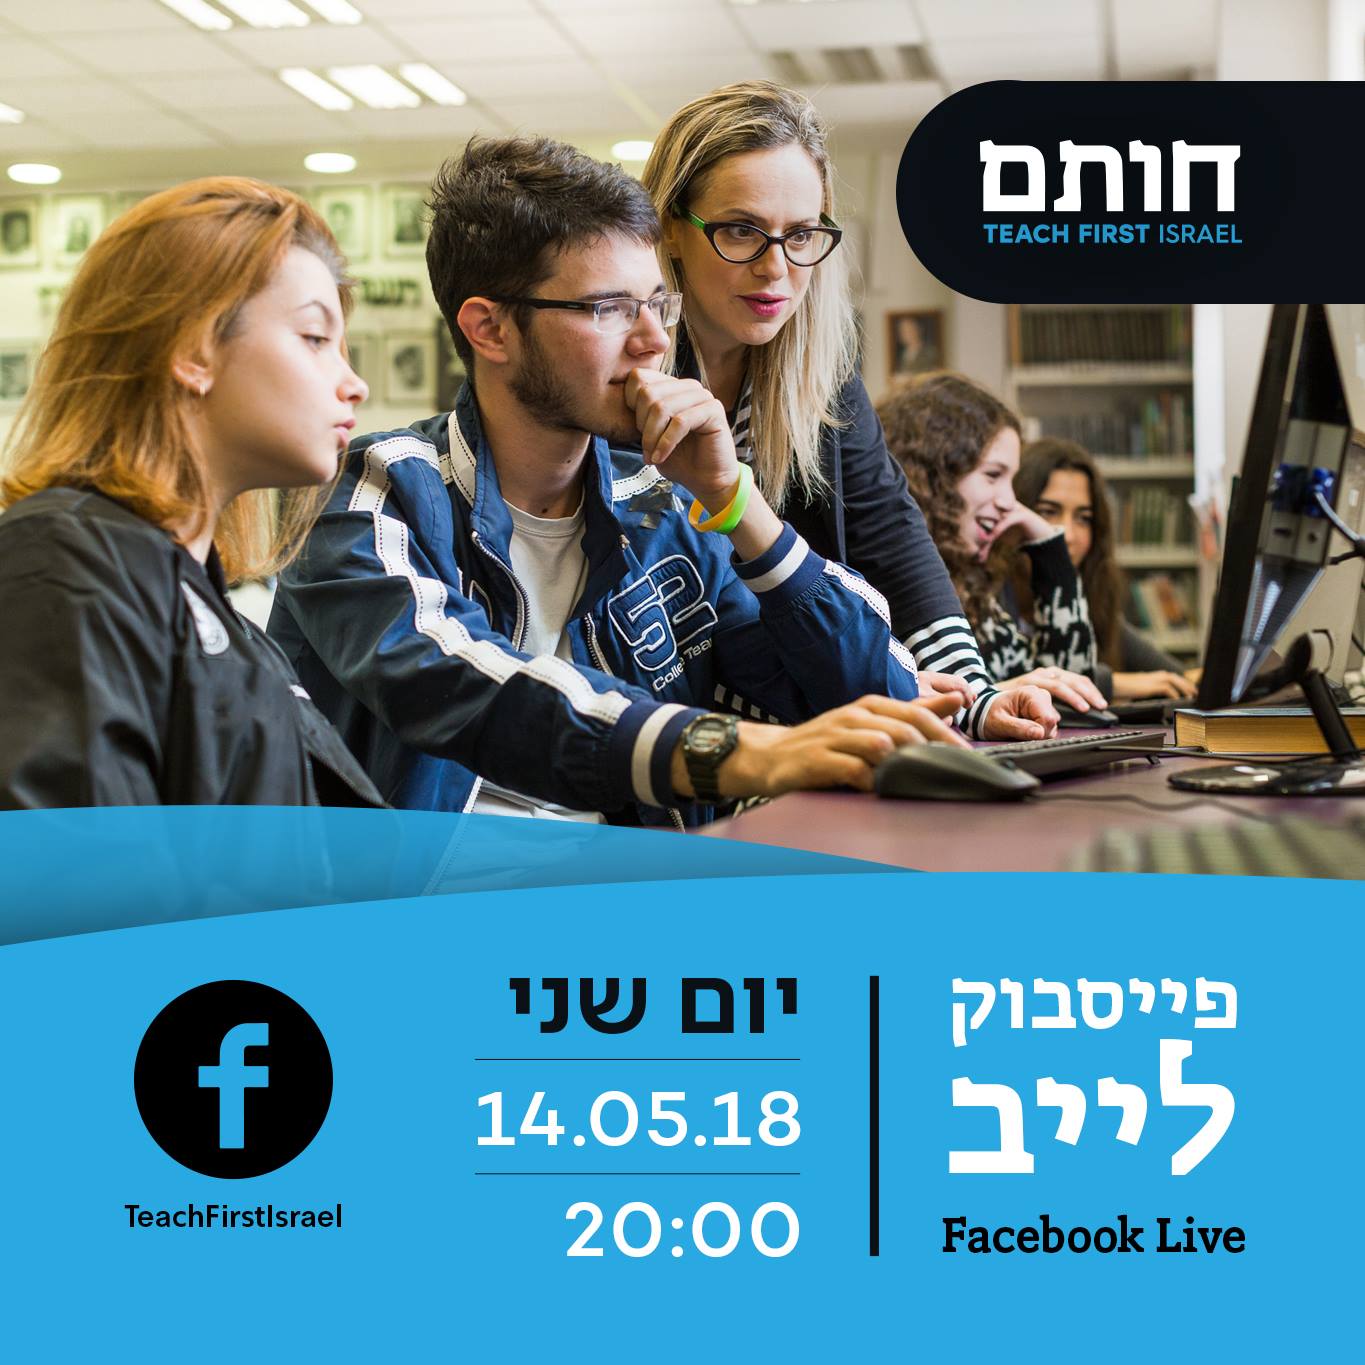 Three students sit at a computer in this ad that Ronen Goldman shot for Teach First Israel